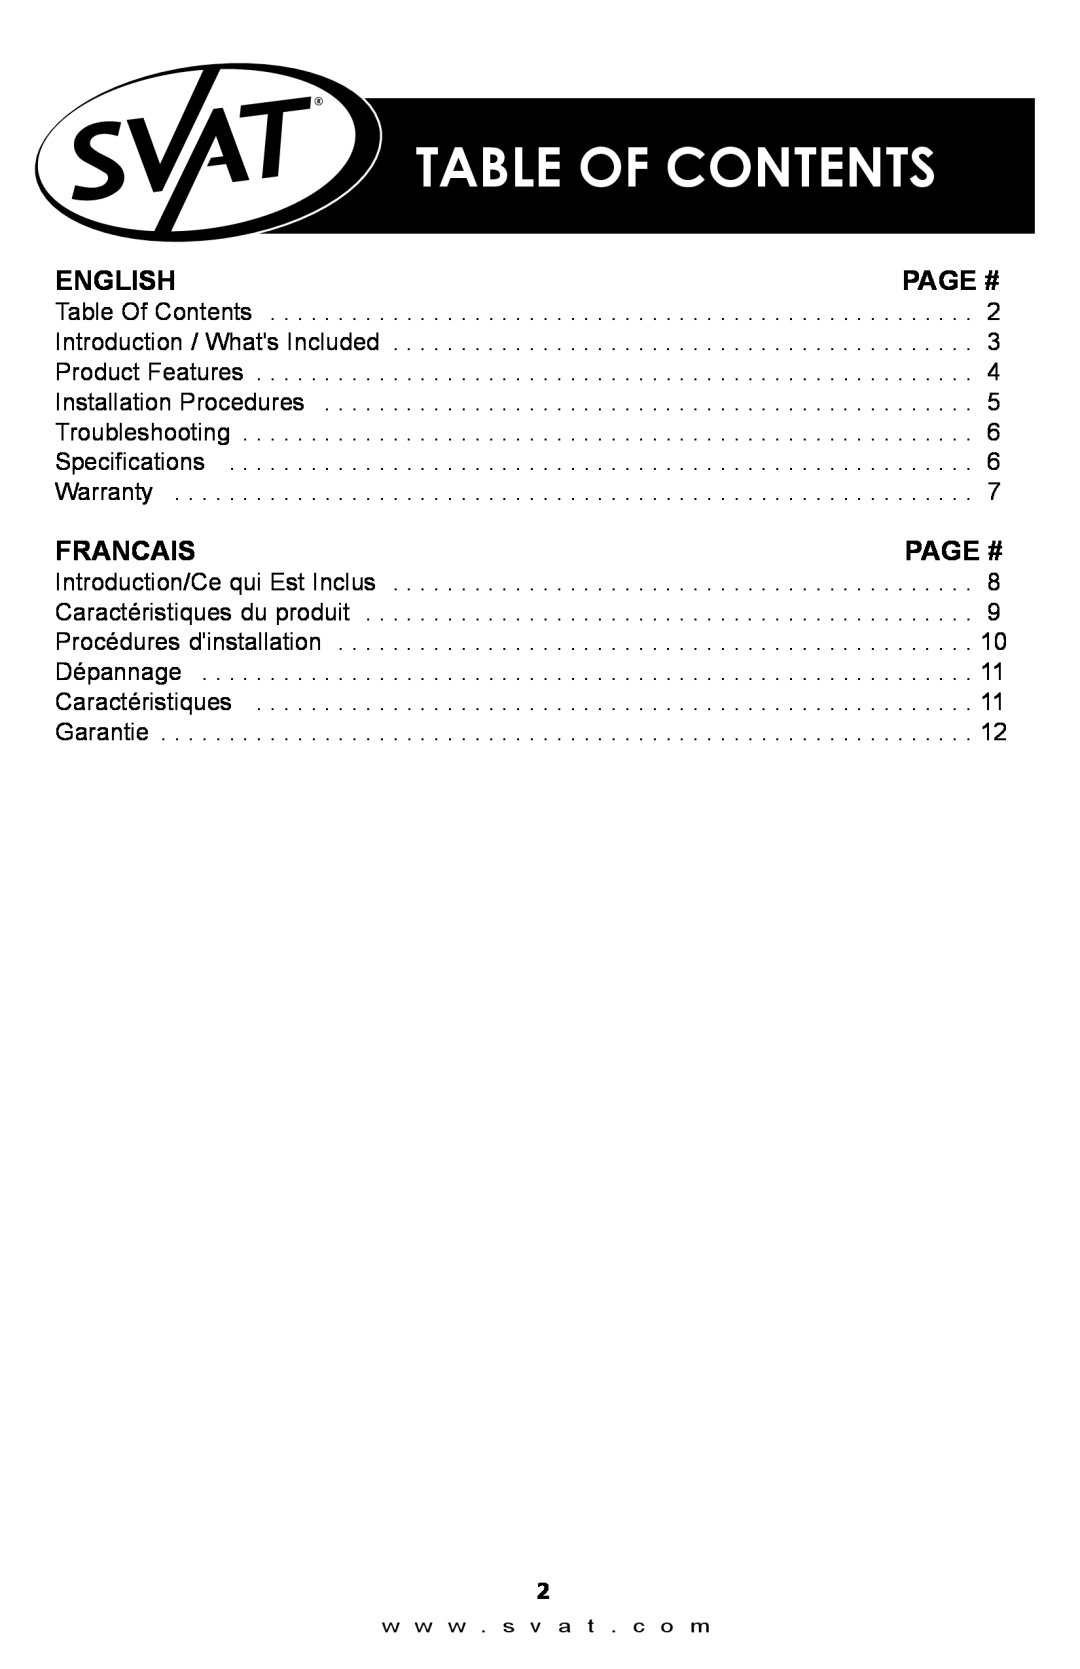 SVAT Electronics qxd600 instruction manual English, Page #, Francais, Table Of Contents 